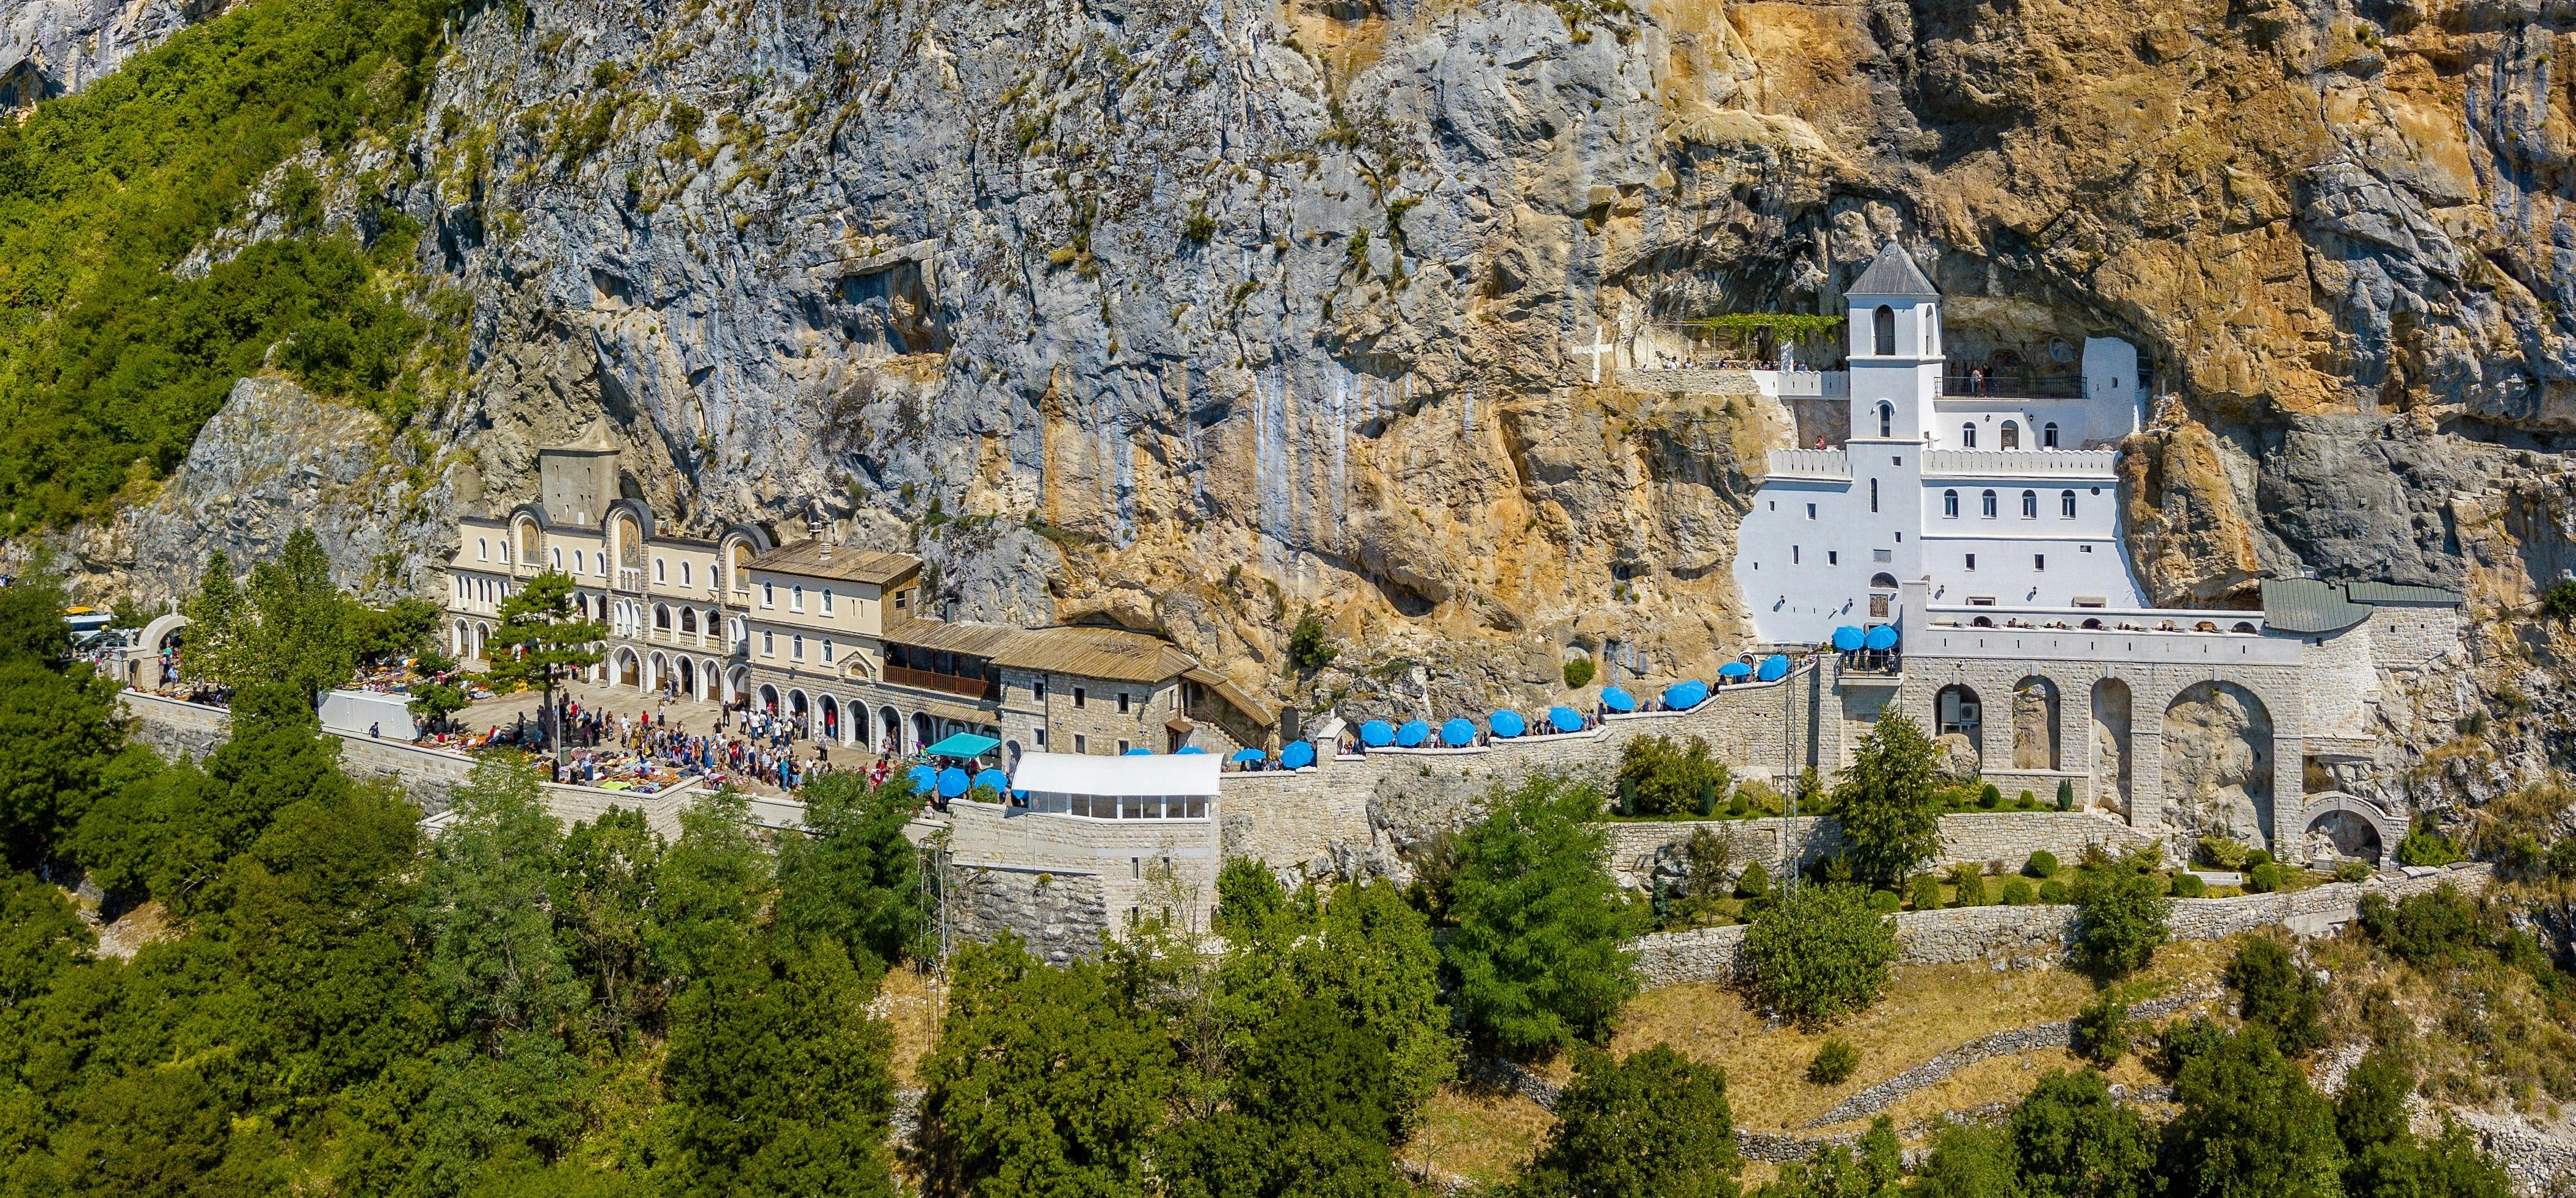 Private day trip to Monastery Ostrog with transport from Herceg Novi